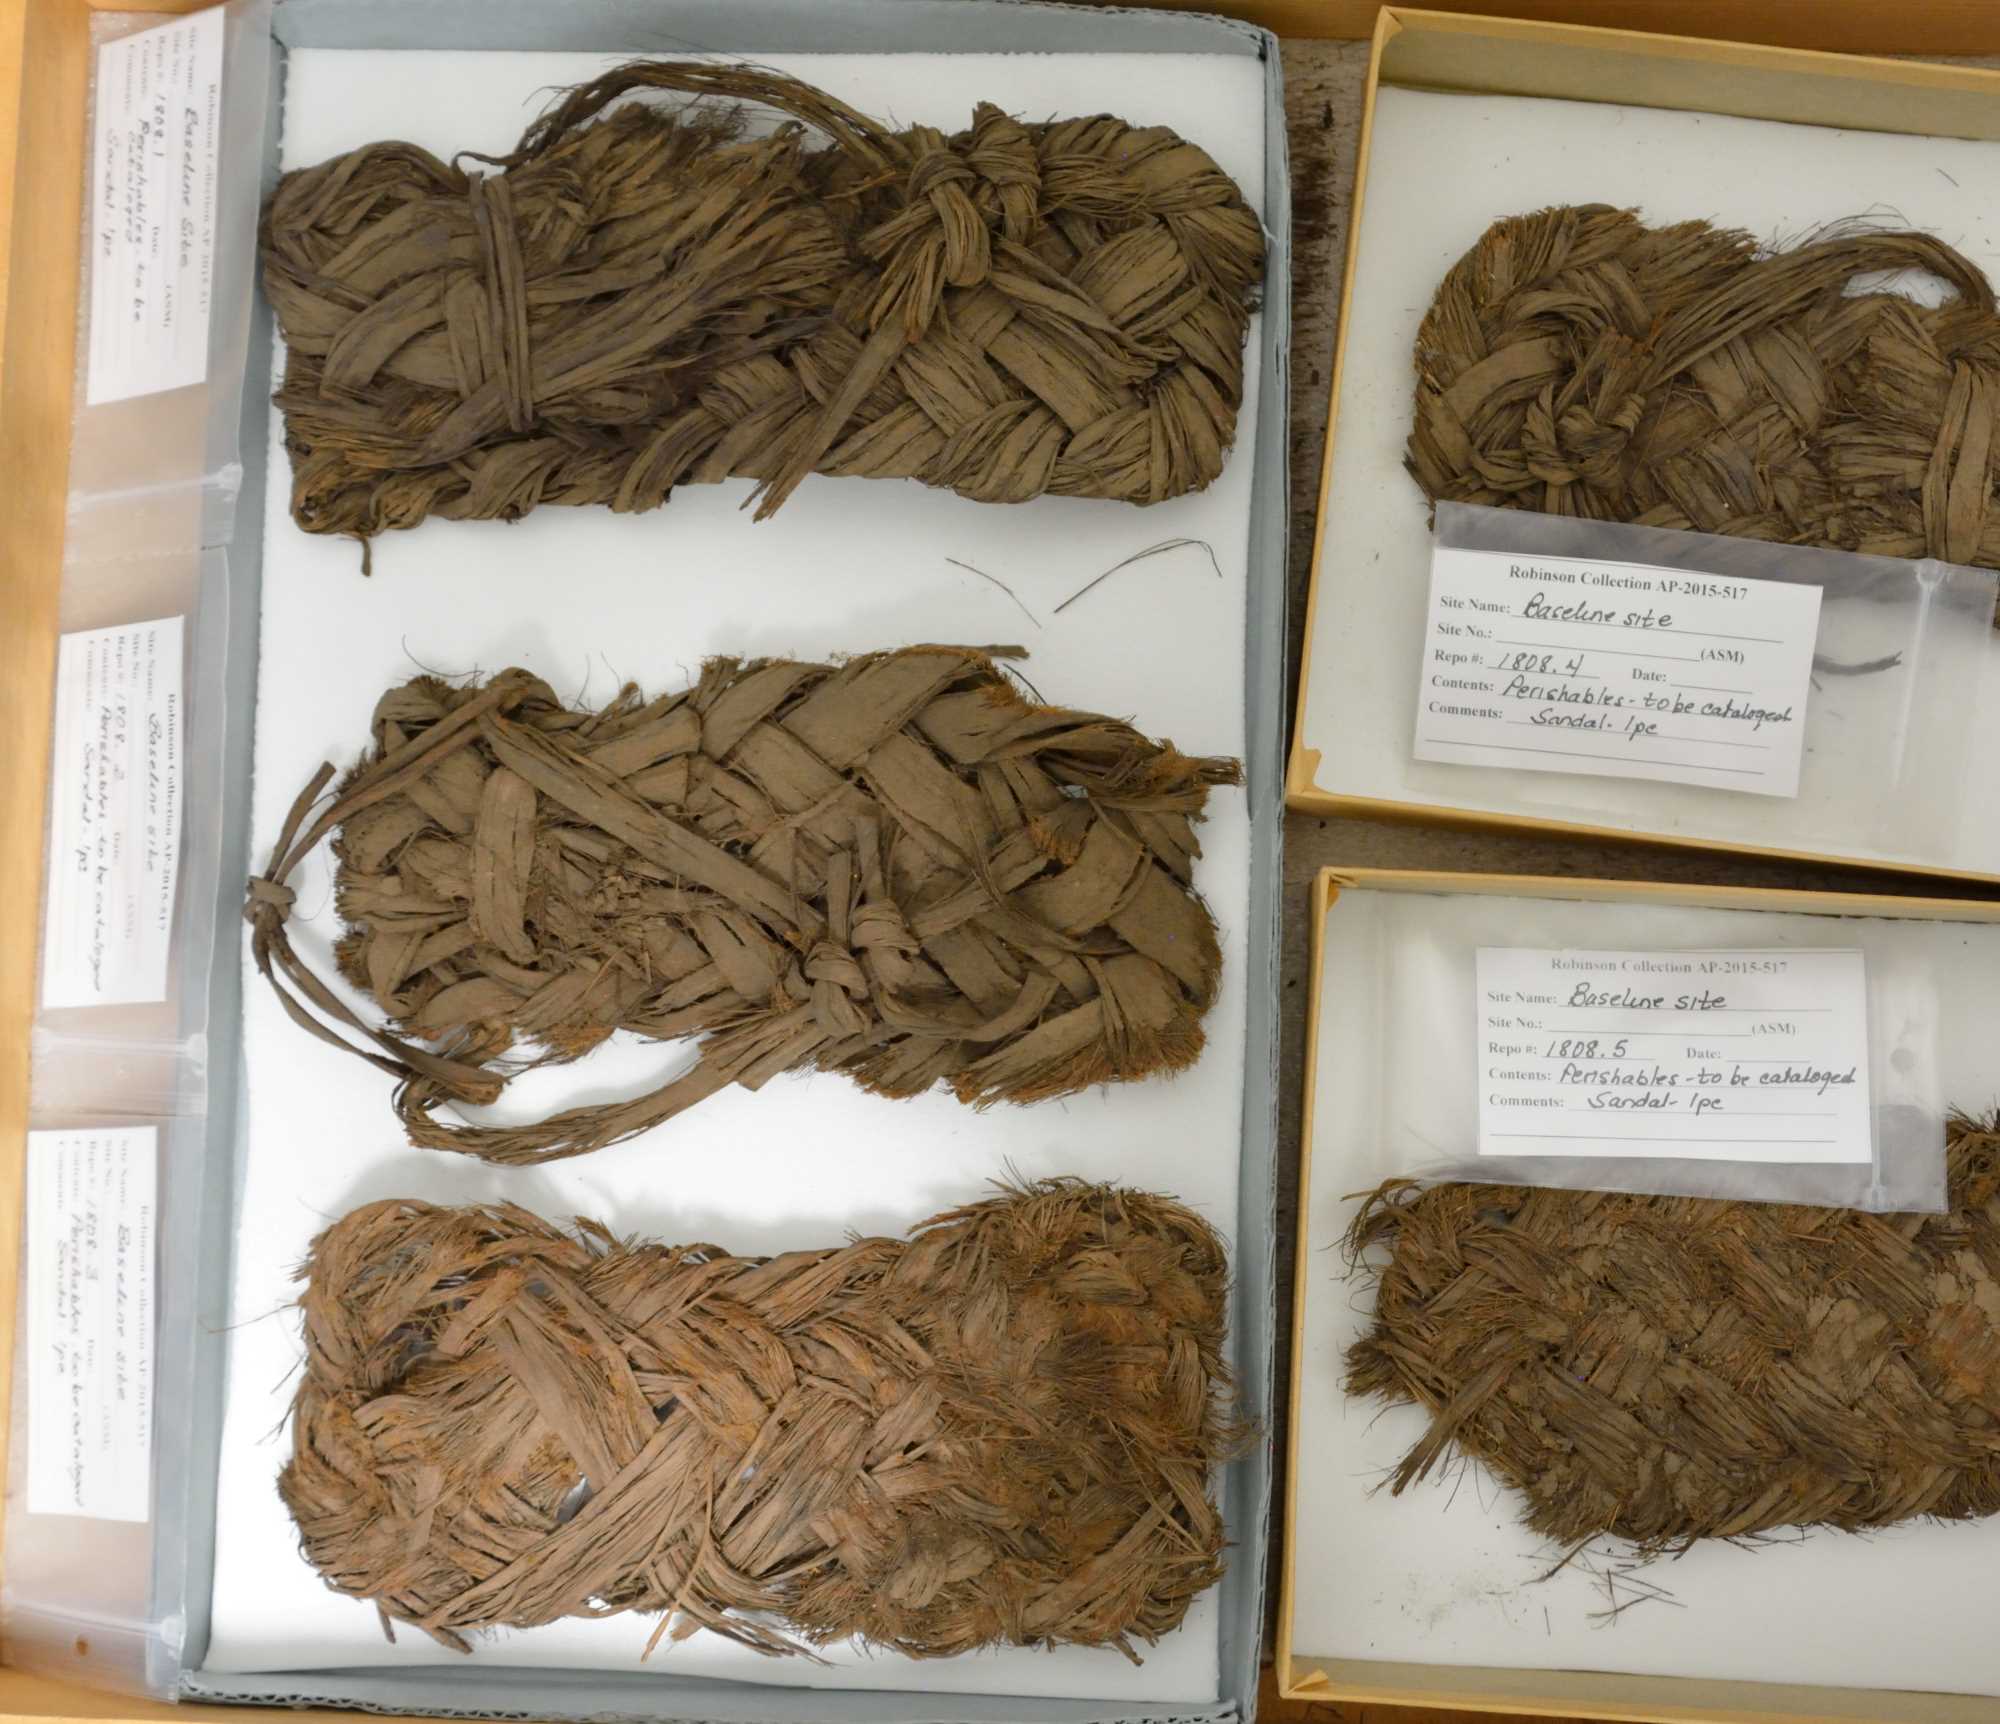 Tray of sandals from the “Baseline” site. Image: Lance K. Trask